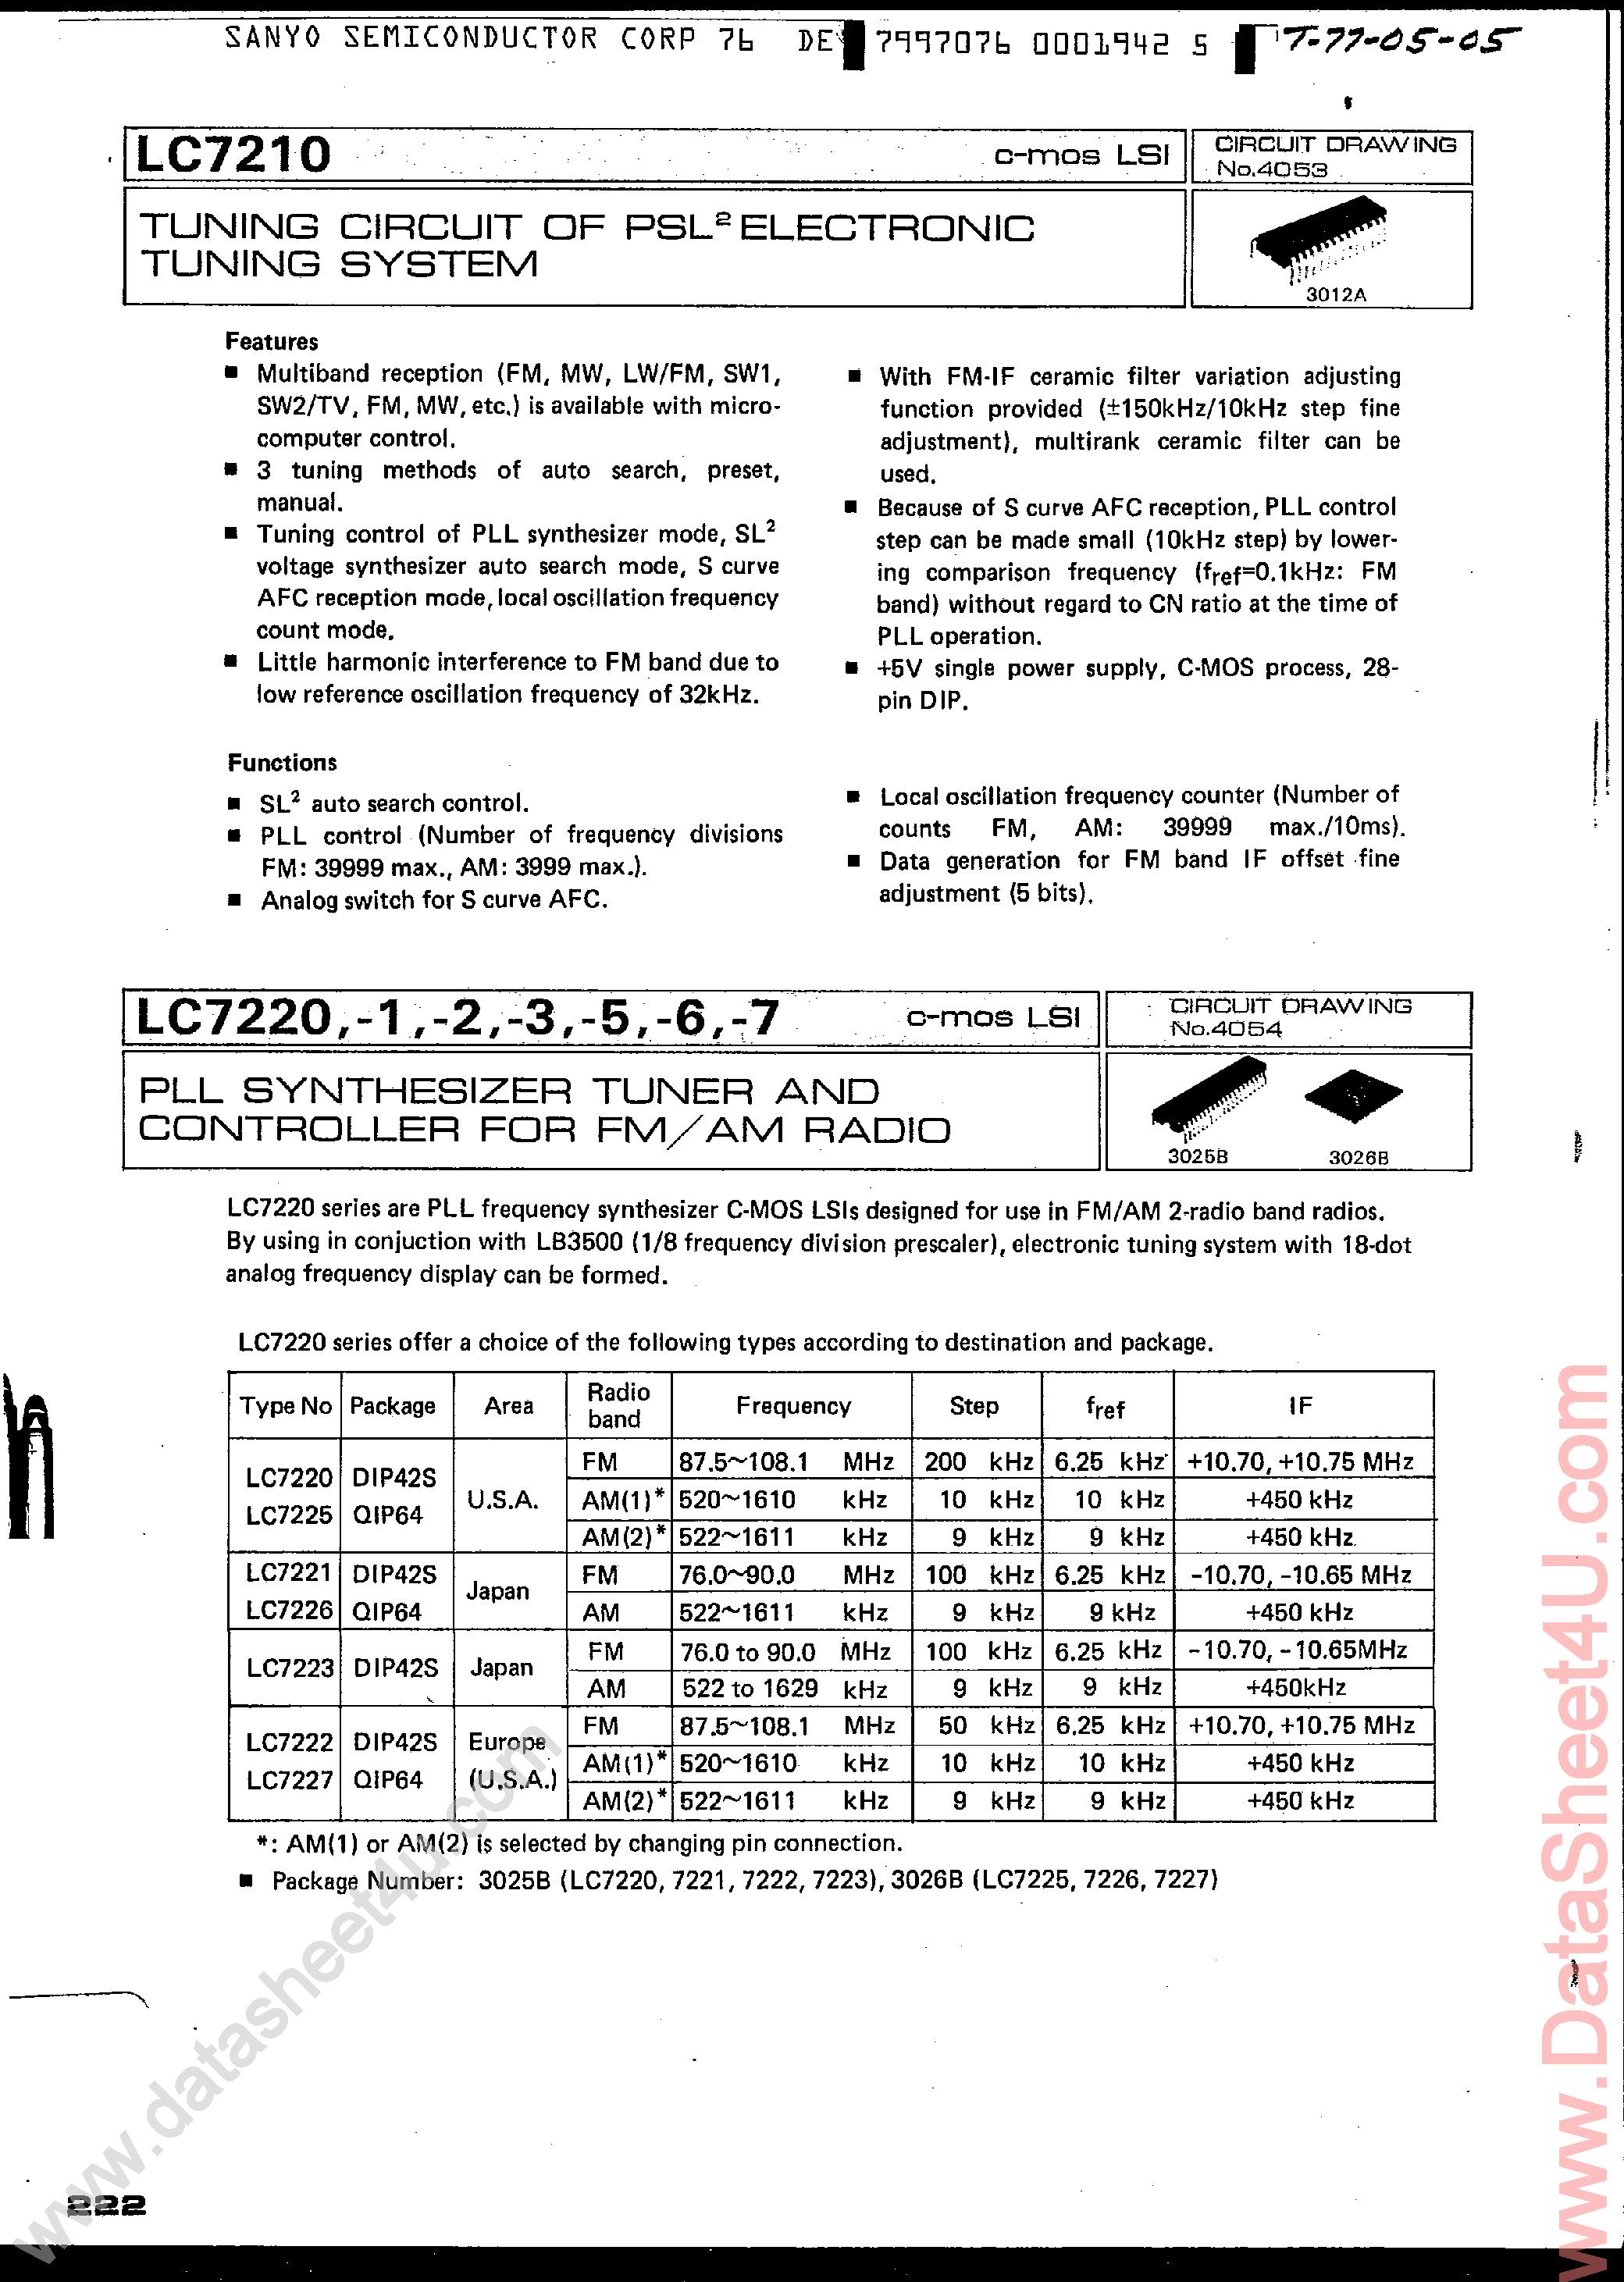 Datasheet LC7210 - (LC7220 -LC7227) Tuning Circuit of PSL Electronic Tuning System page 1